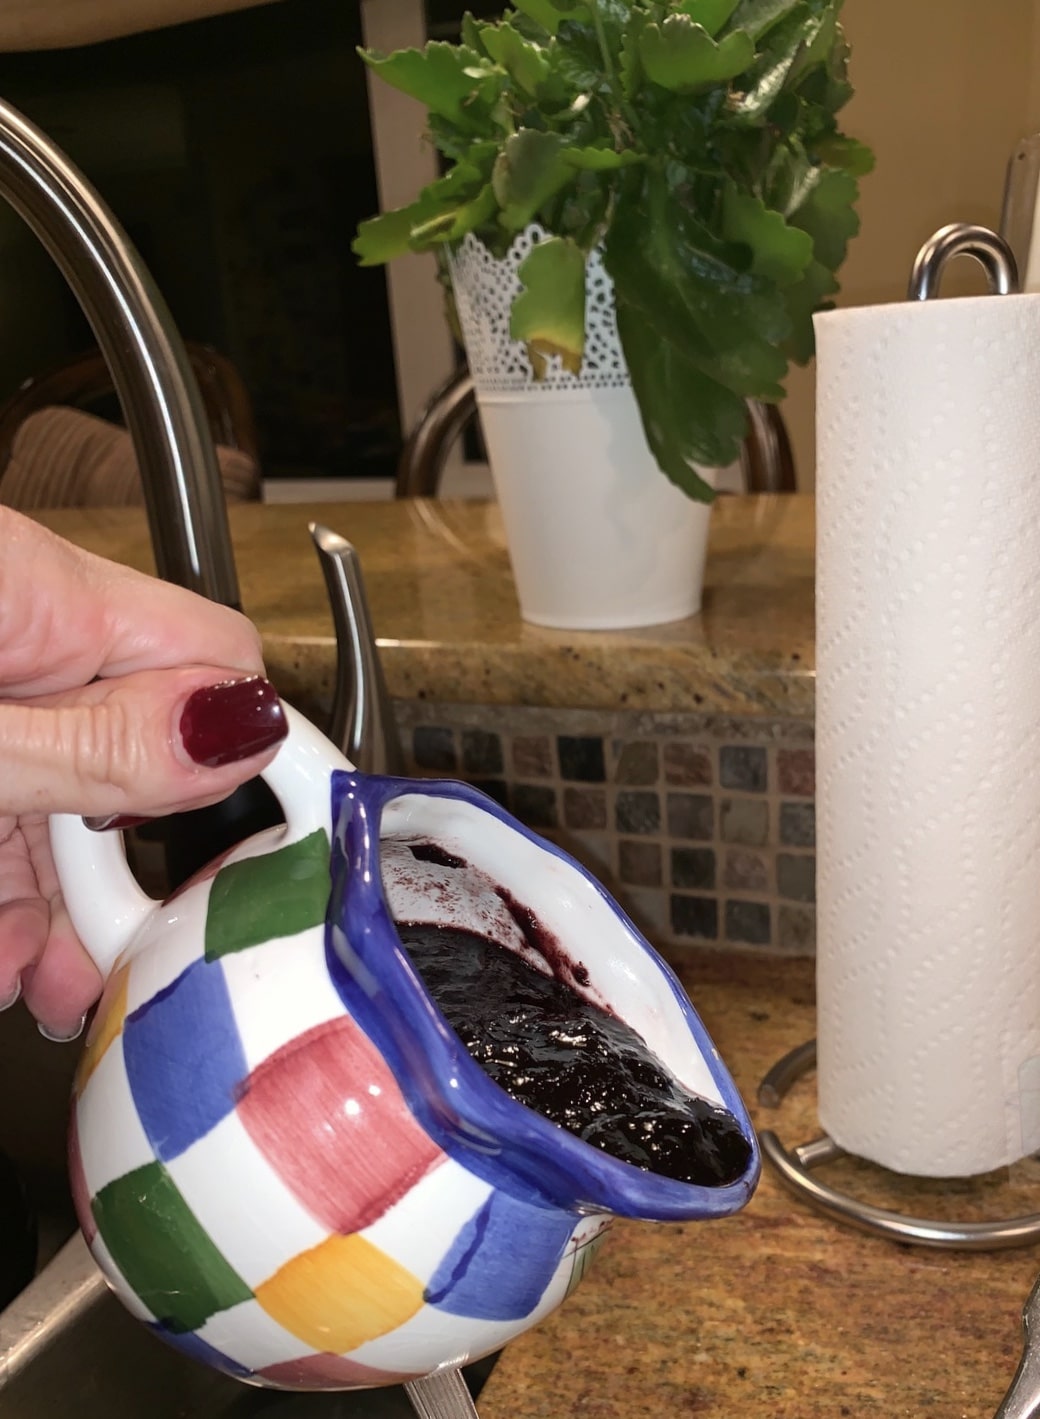 blueberry sauce being poured out of a small pitcher